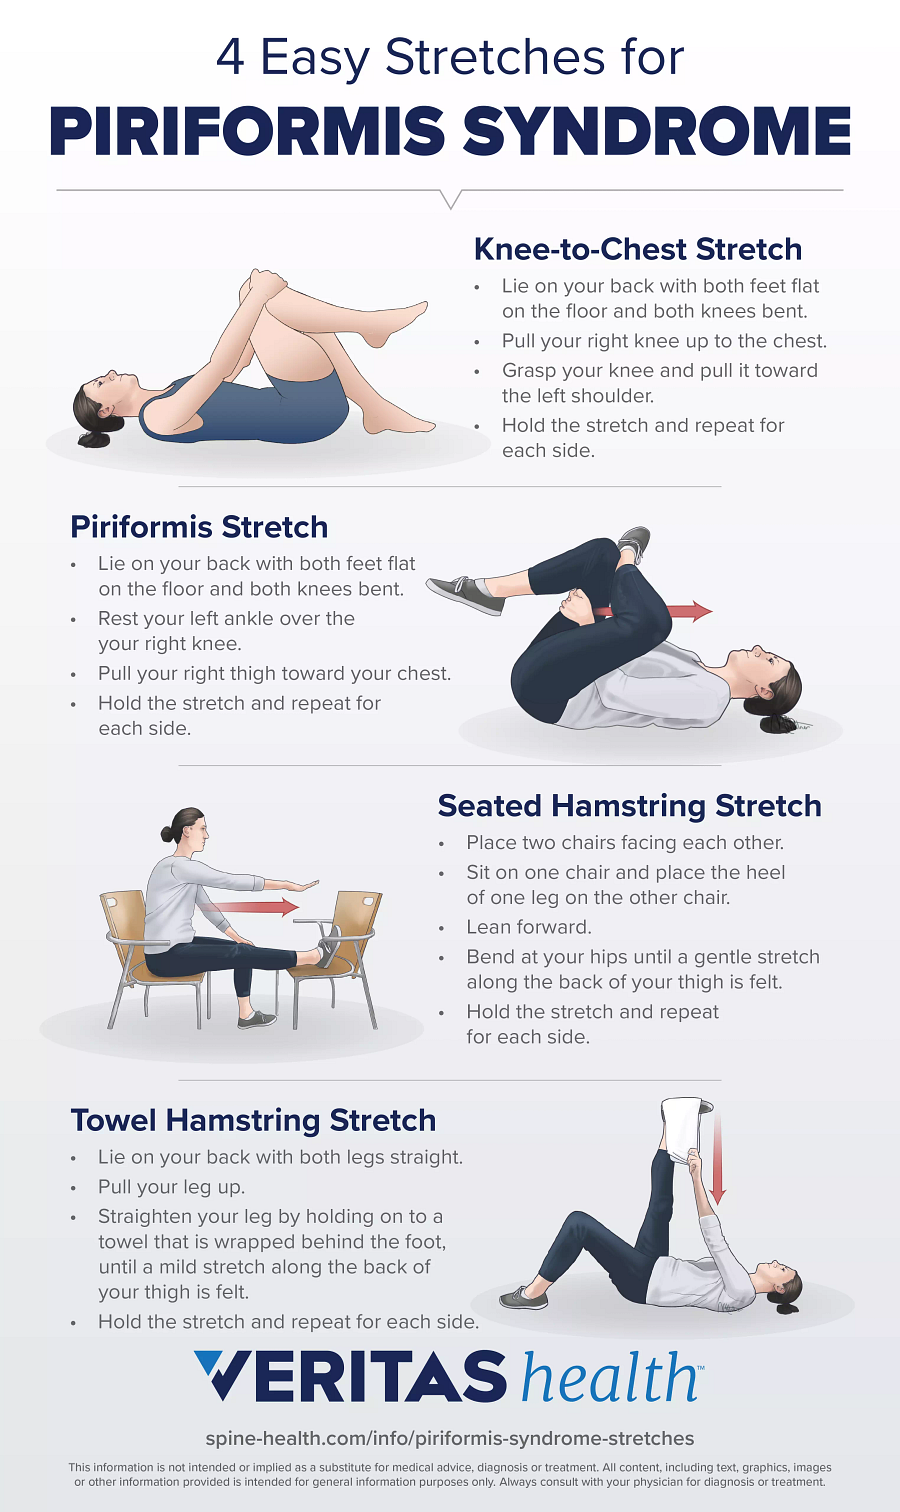 Infographic of 4 Easy Stretches for Pirifomis Syndrome